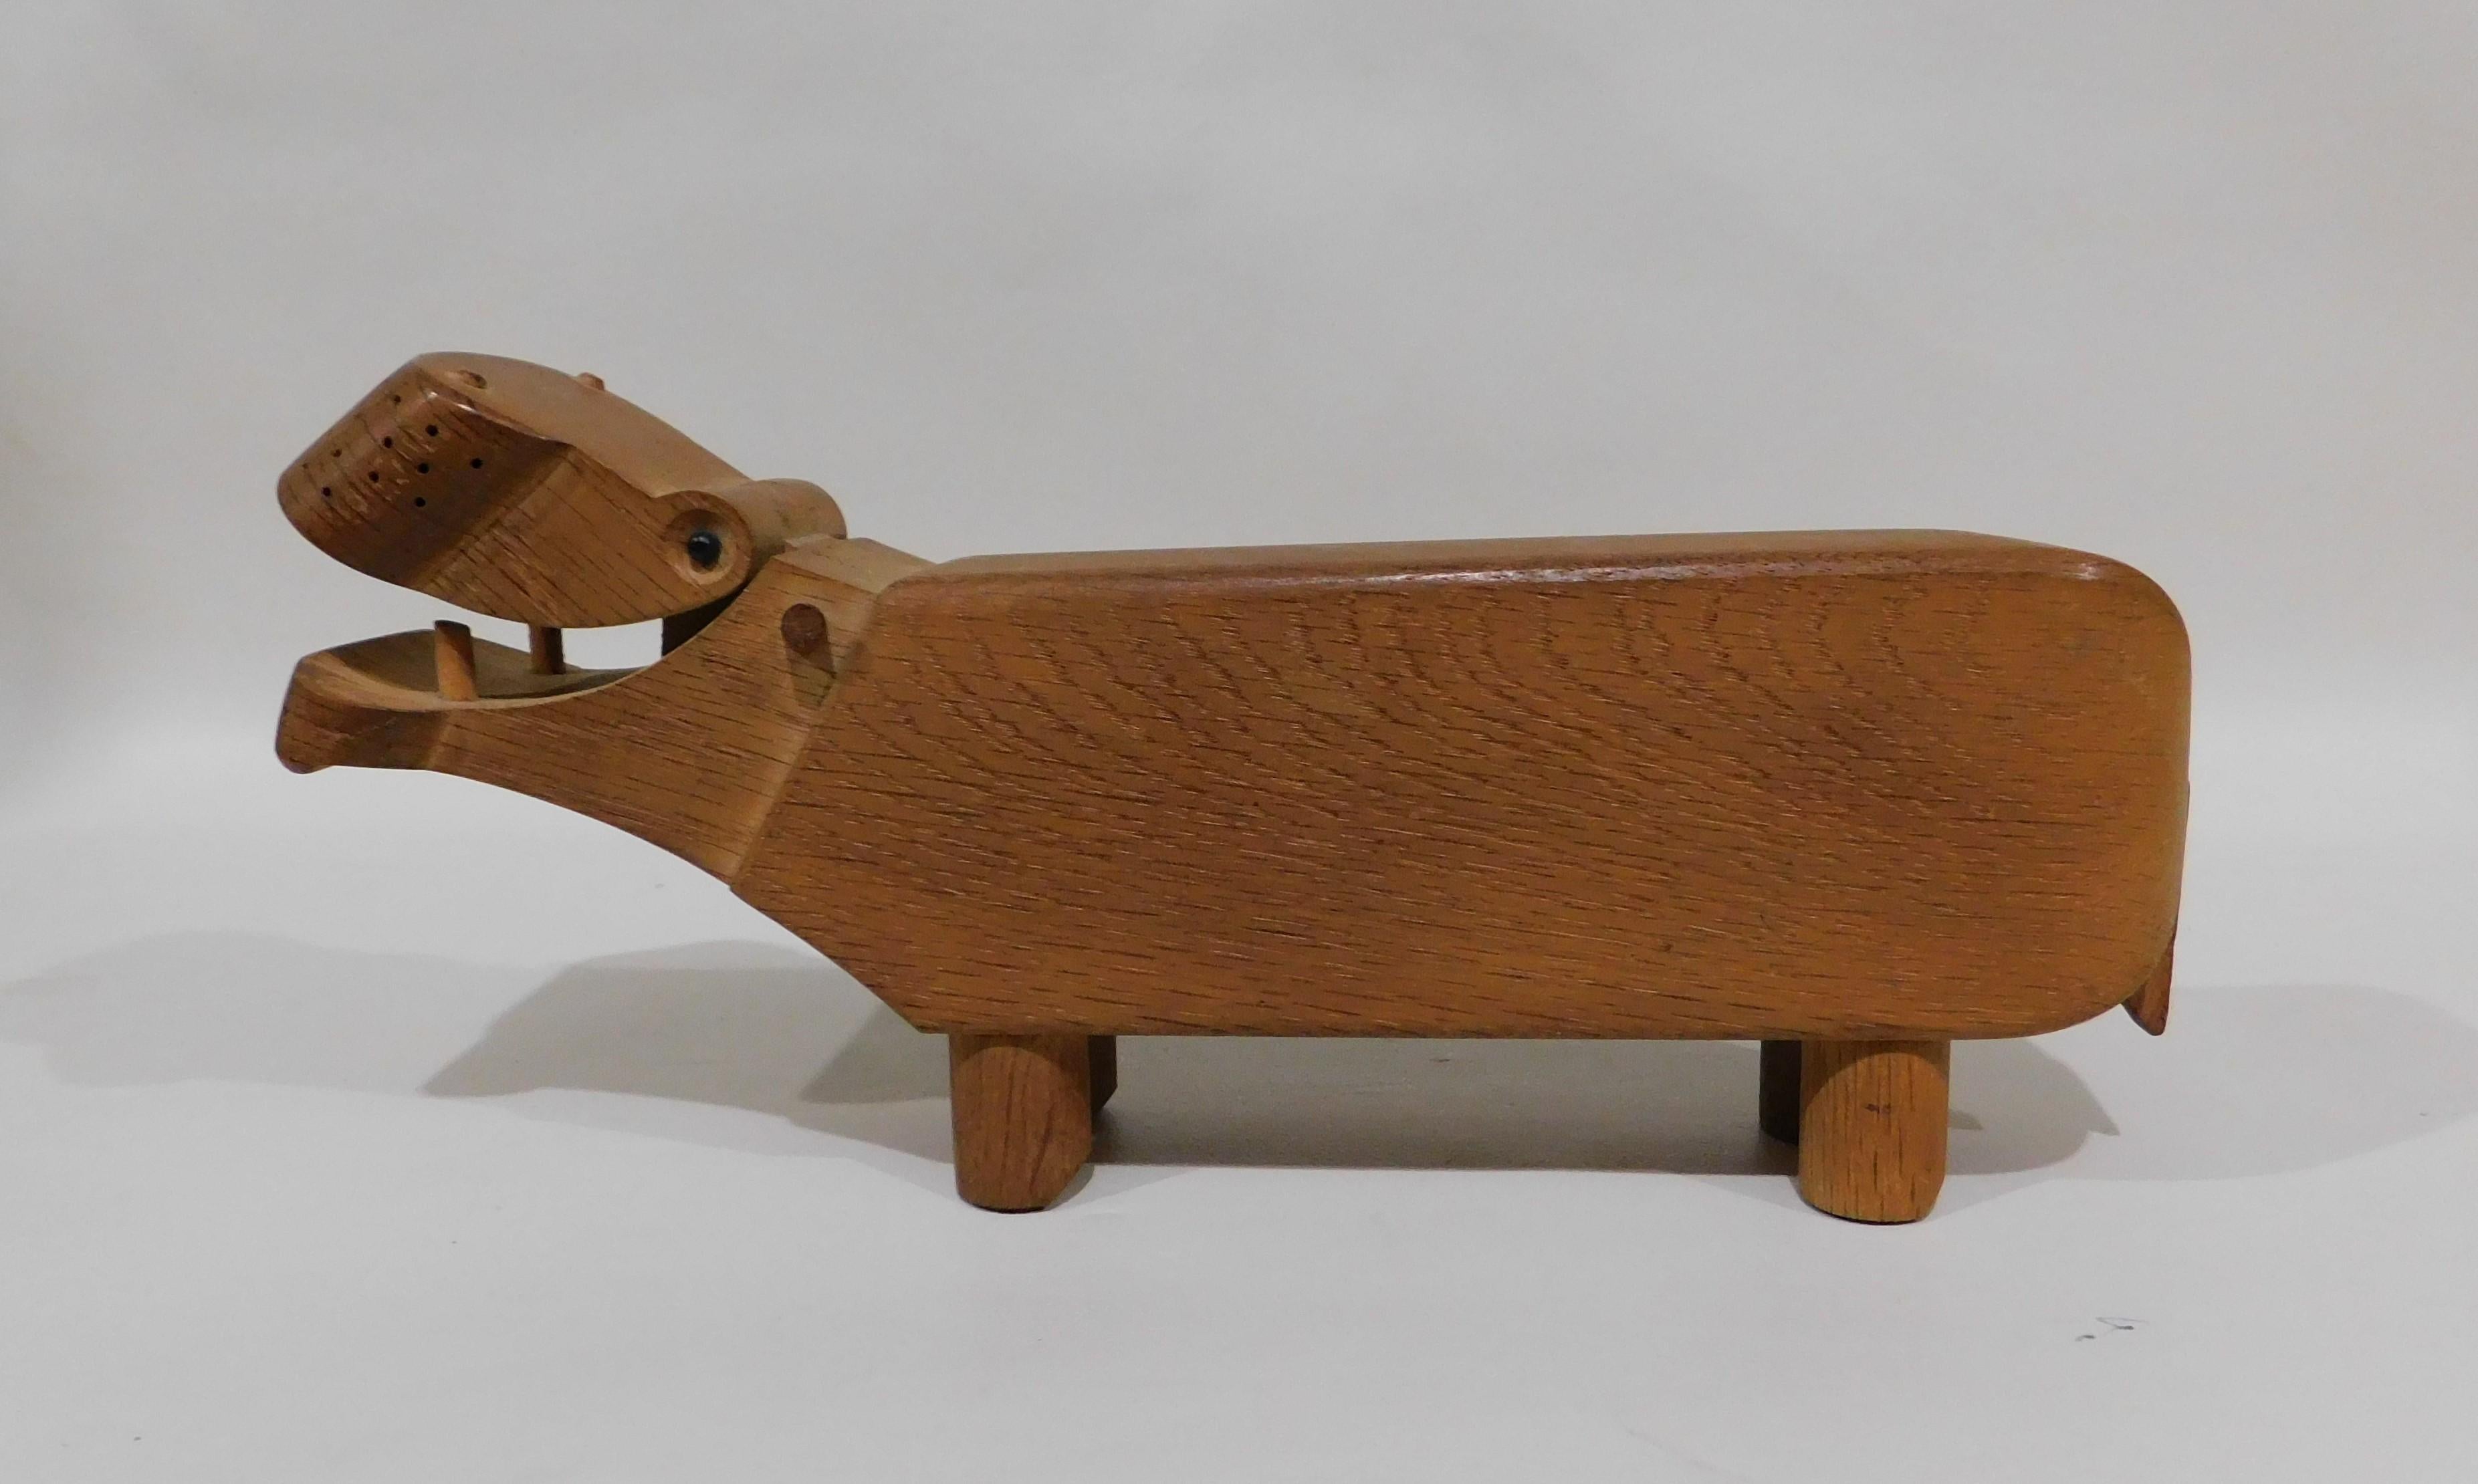 Mid-Century Modern Kay Bojesen designed the Hippopotamus in 1955 because he needed a device to store his pencil's. The hippo is made of oak and features an adjustable jaw allowing you to hold your pencil or pen. It is stamped on the bottom Kay